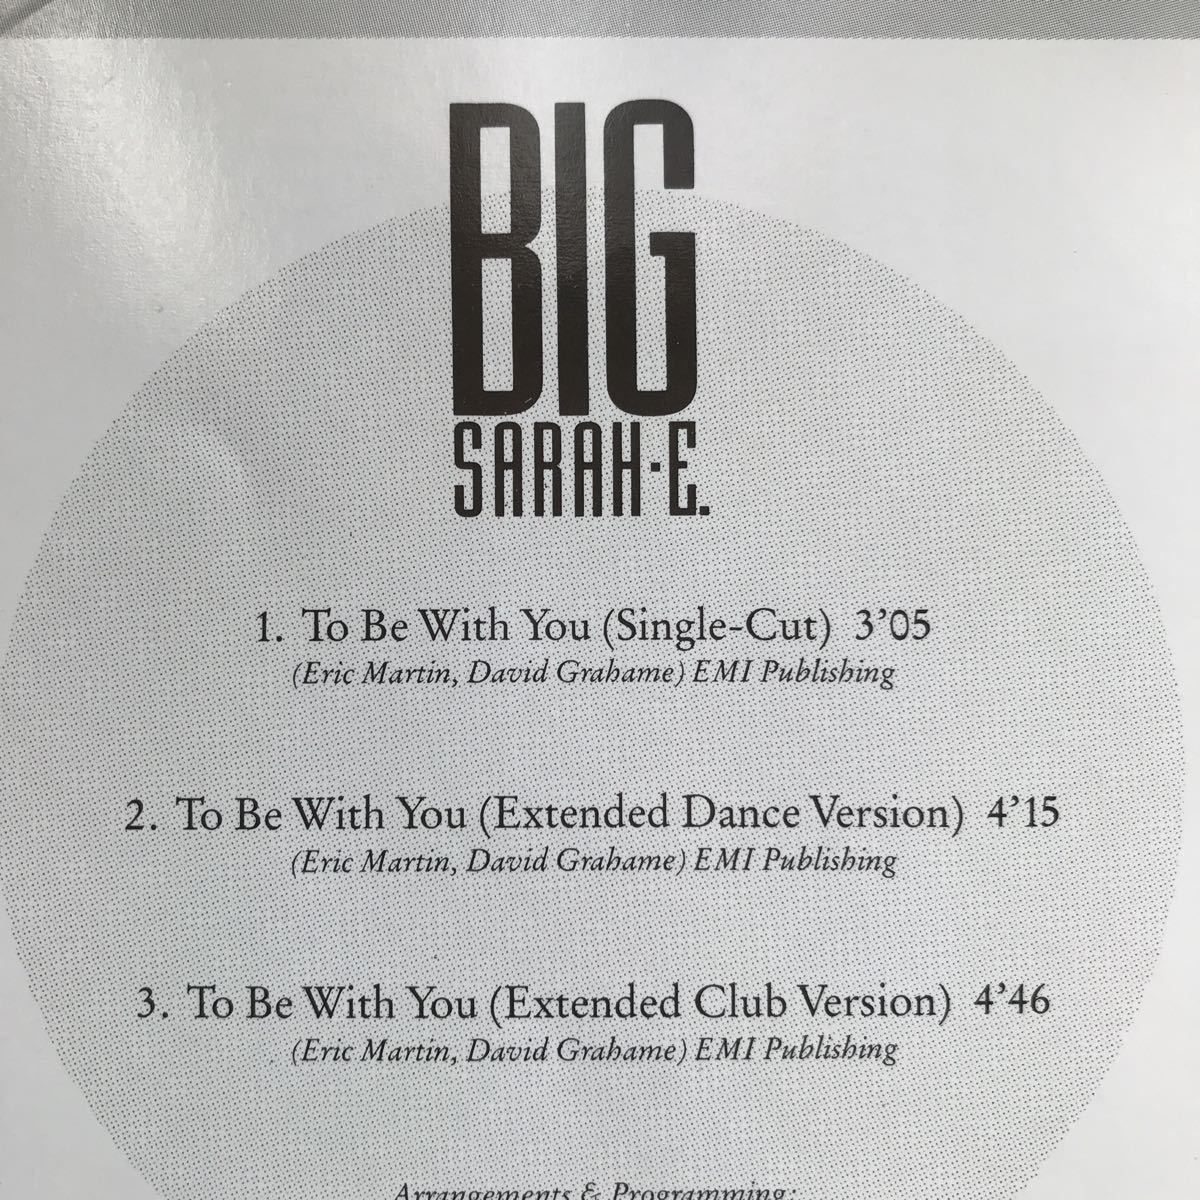 【r&b】Big Sarah-E. / To Be With You (Dance Version) ［CDs］groundbeat_cover song《5b024 9595》_画像4